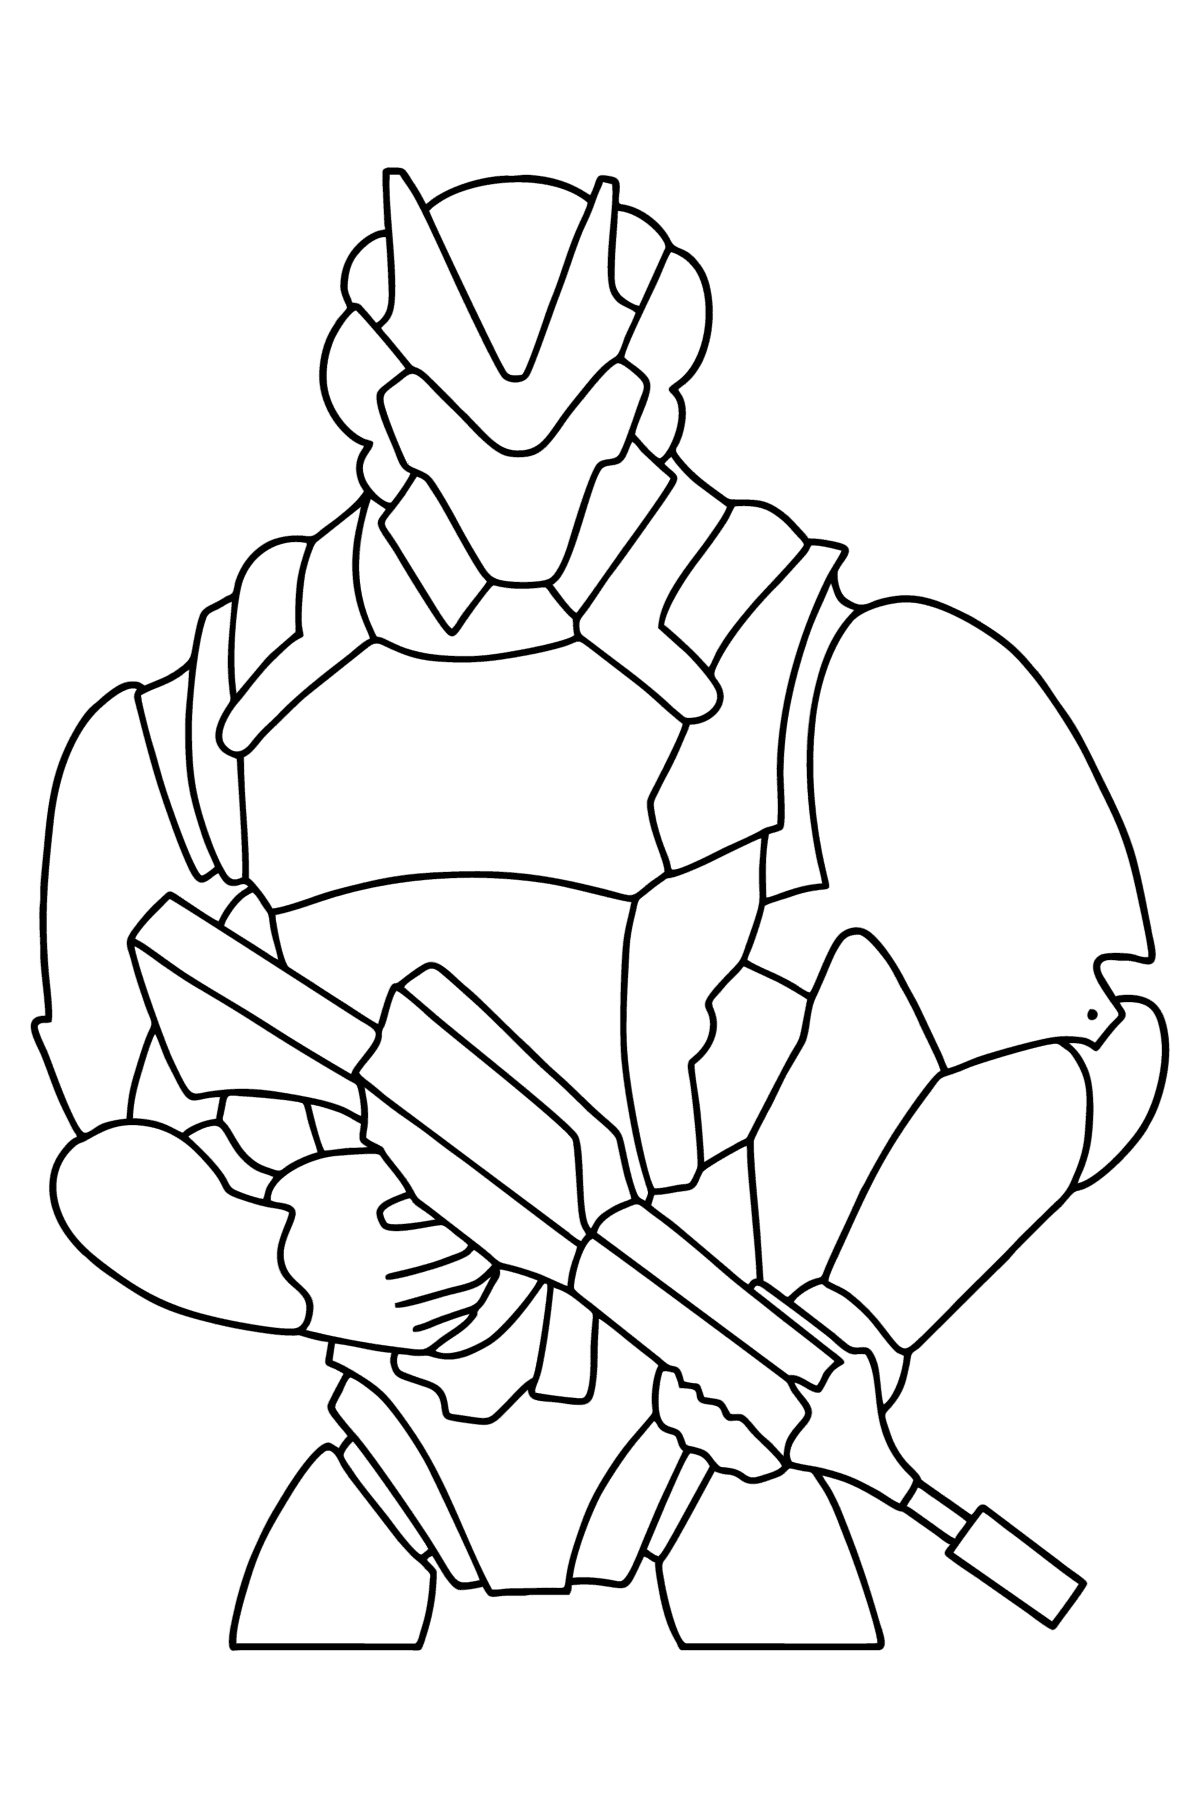 Fortnite Omega coloring page - Coloring Pages for Kids